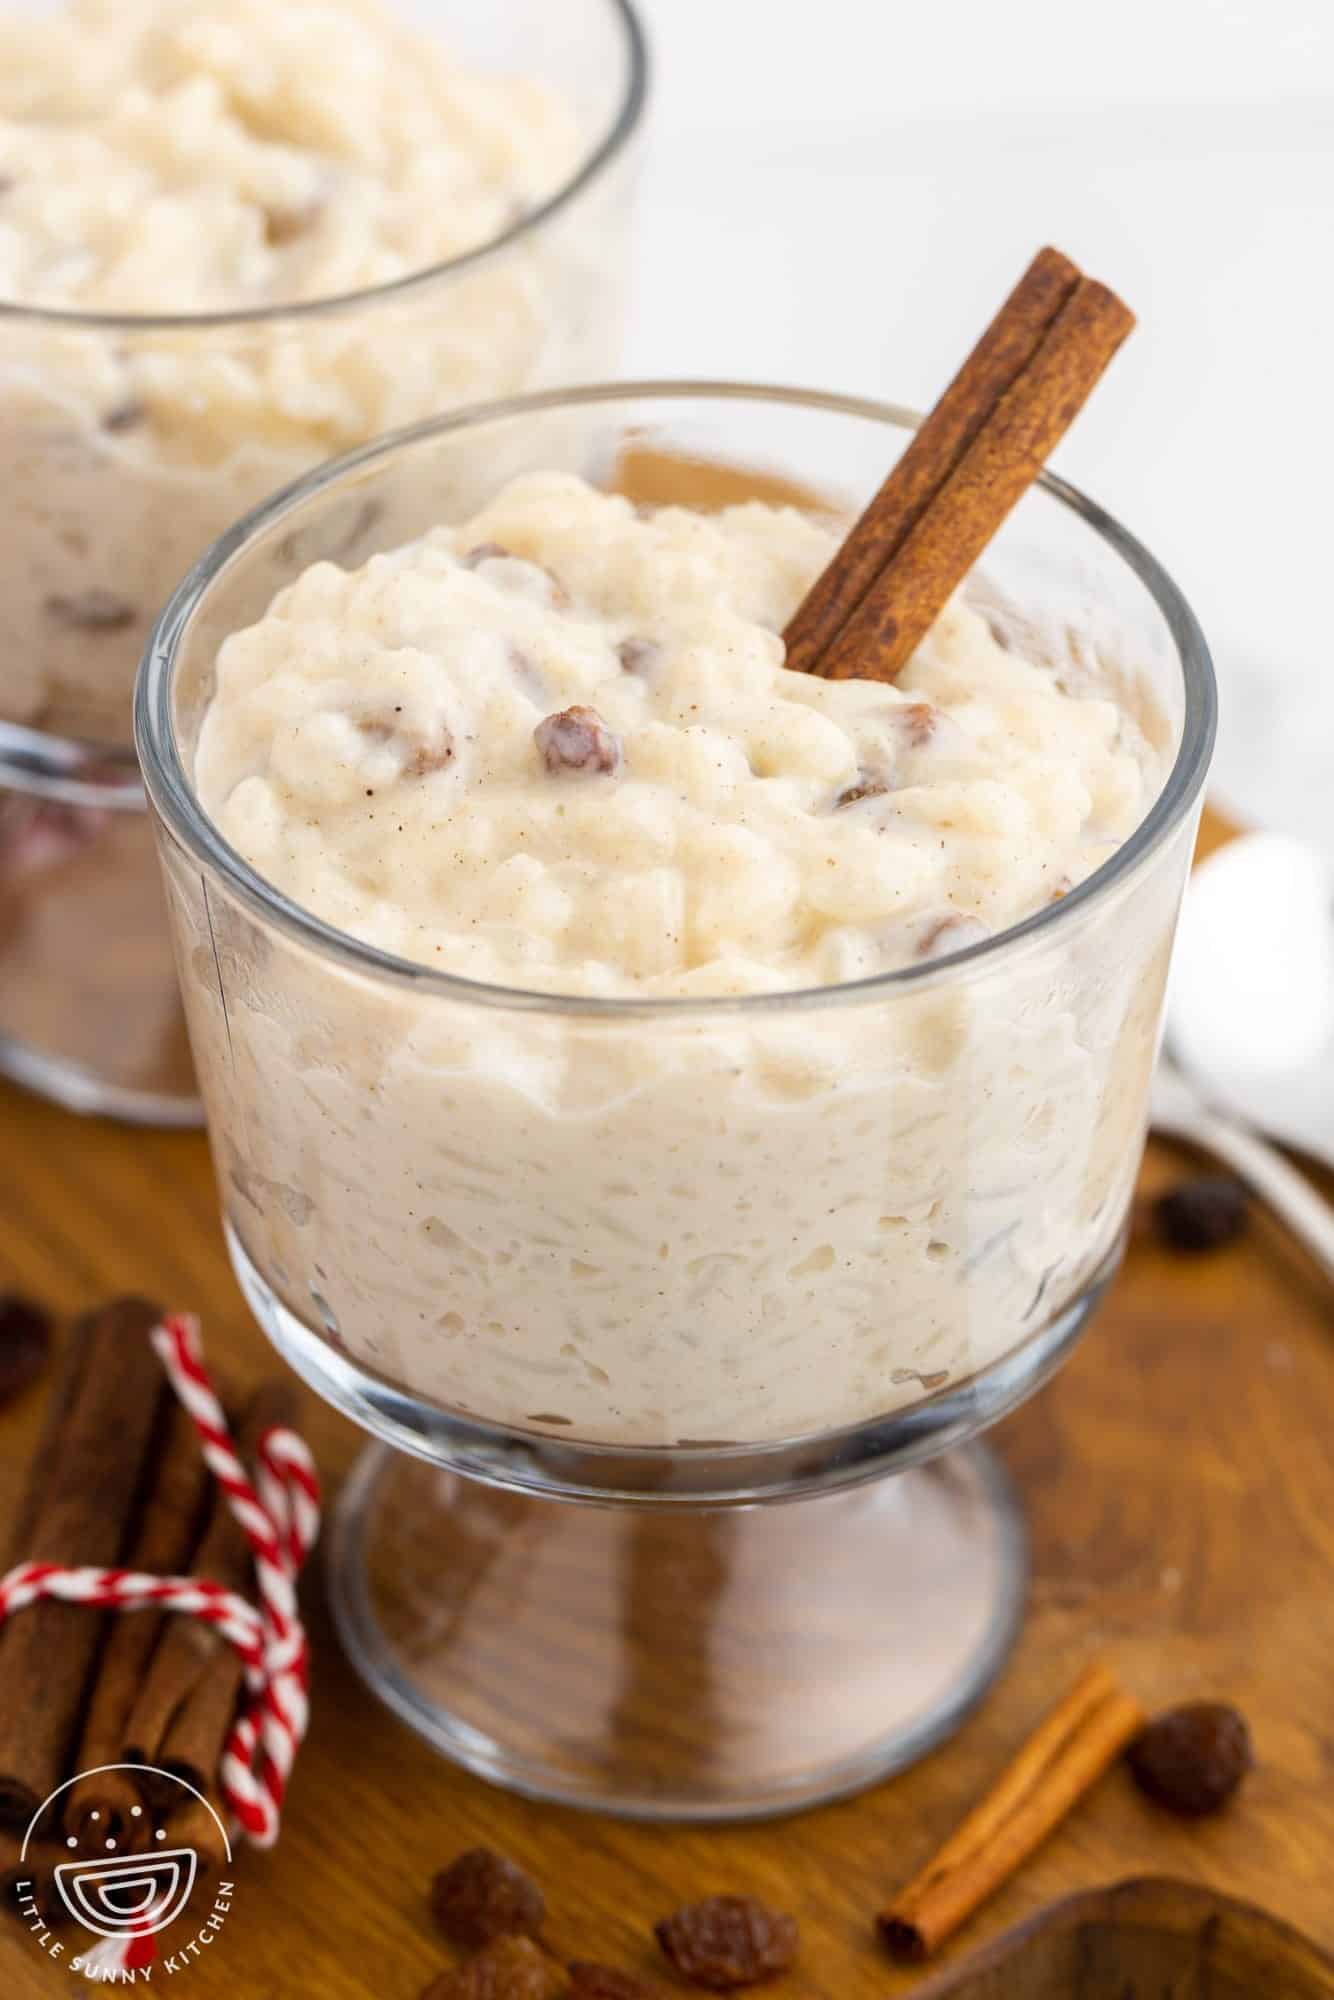 a footed glass dessert dish of rice pudding with a cinnamon stick stuck in it.